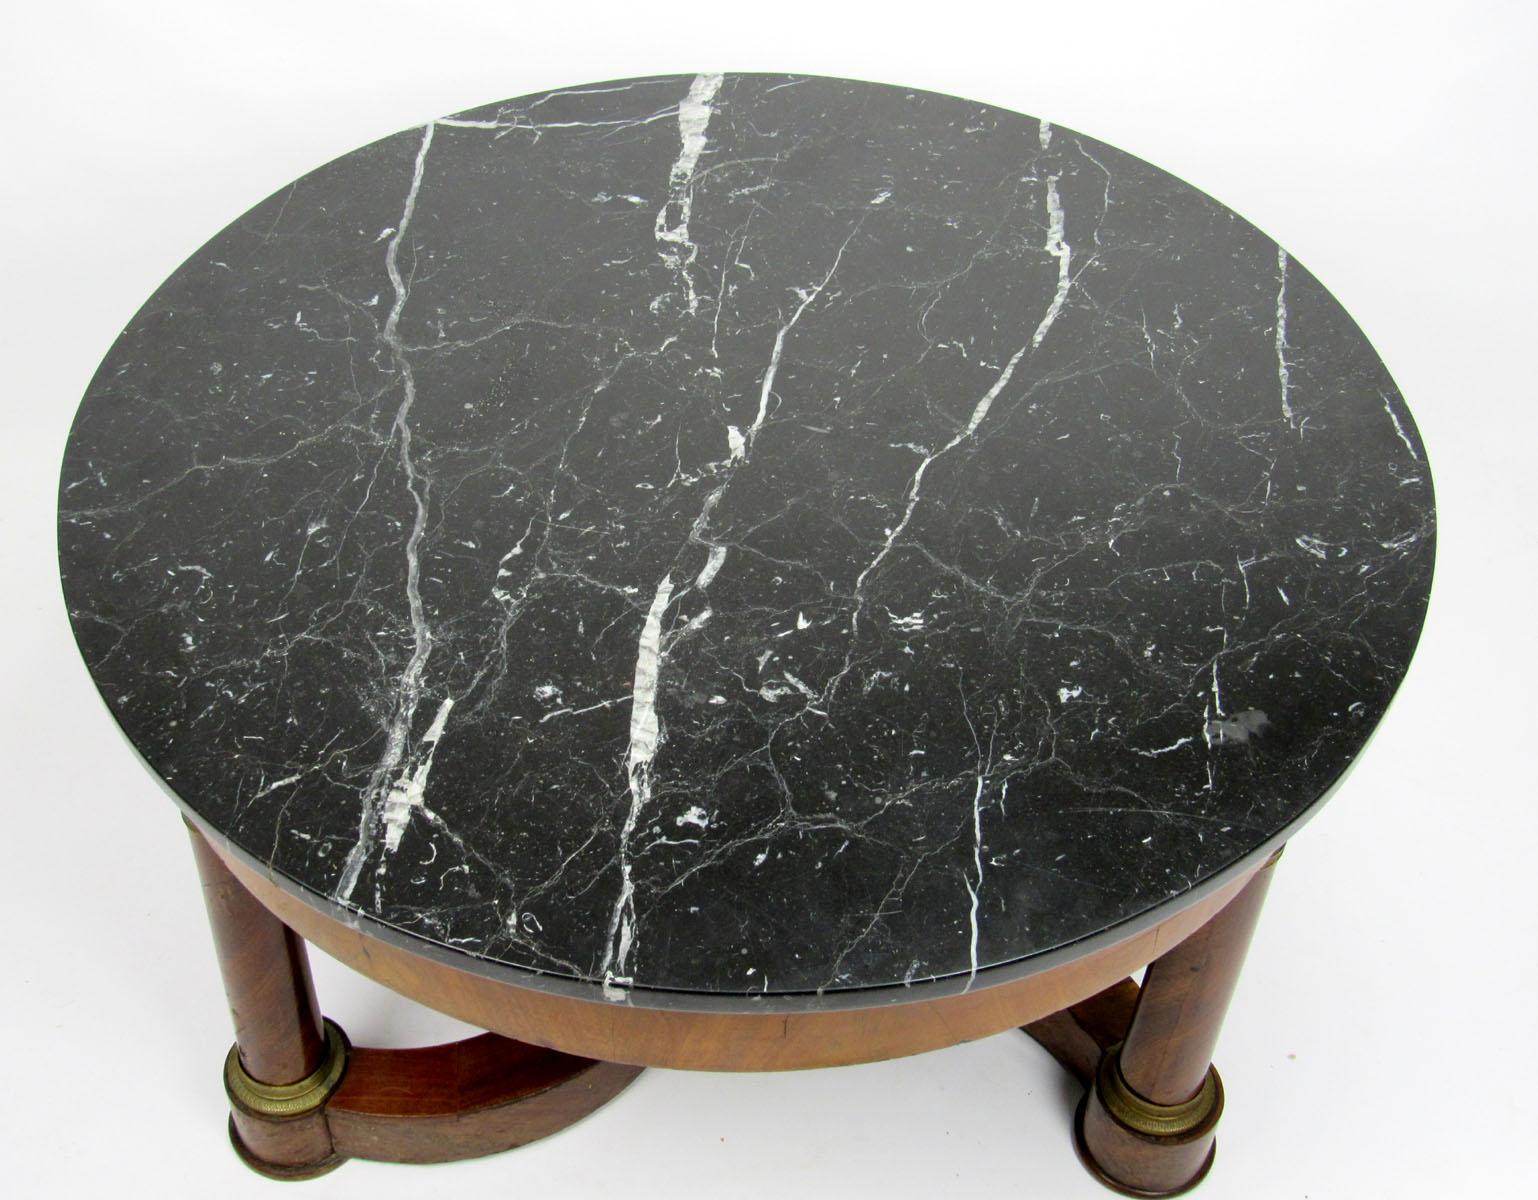 Mid-20th century French Empire style cocktail table with round marble top and swirled base.